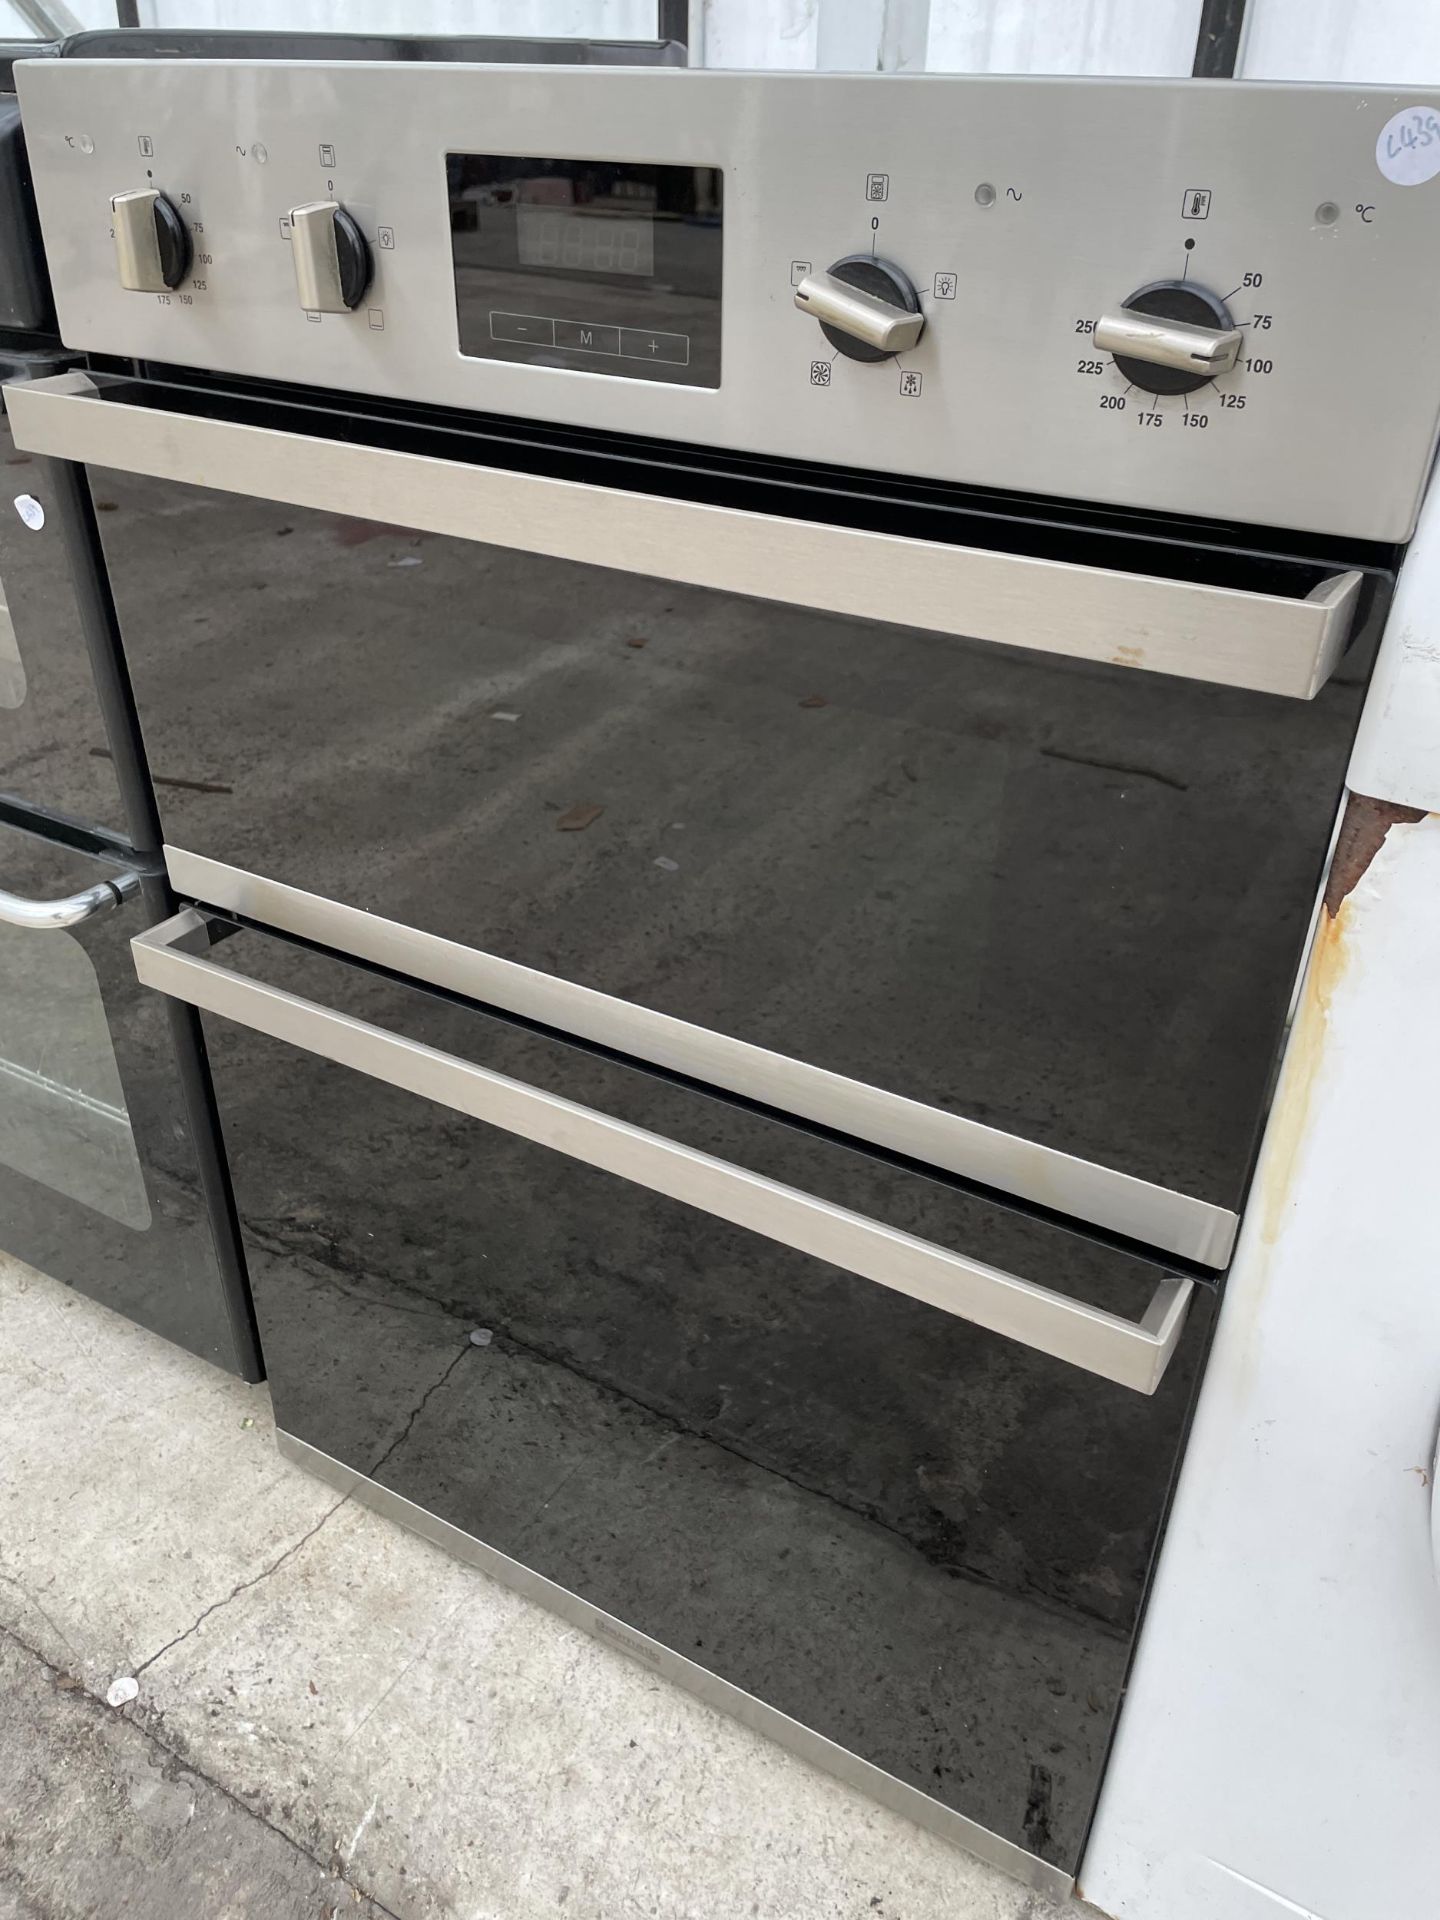 A CHROME AND BLACK BAUMATIC INTERGRATED DOUBLE OVEN - Image 2 of 4